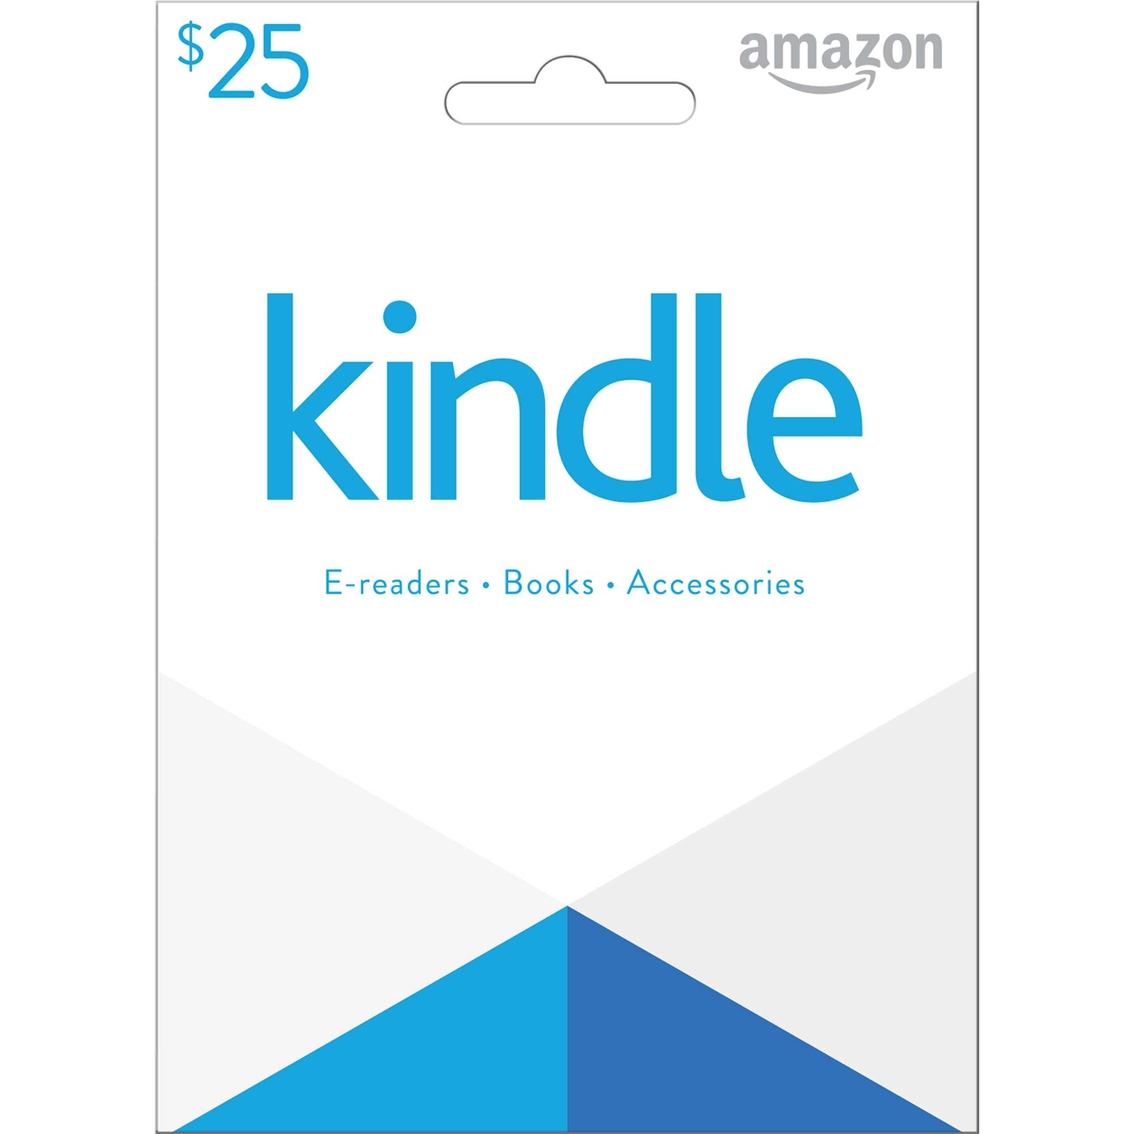 Amazon Kindle Gift Card Entertainment Dining Food Gifts Shop The Exchange